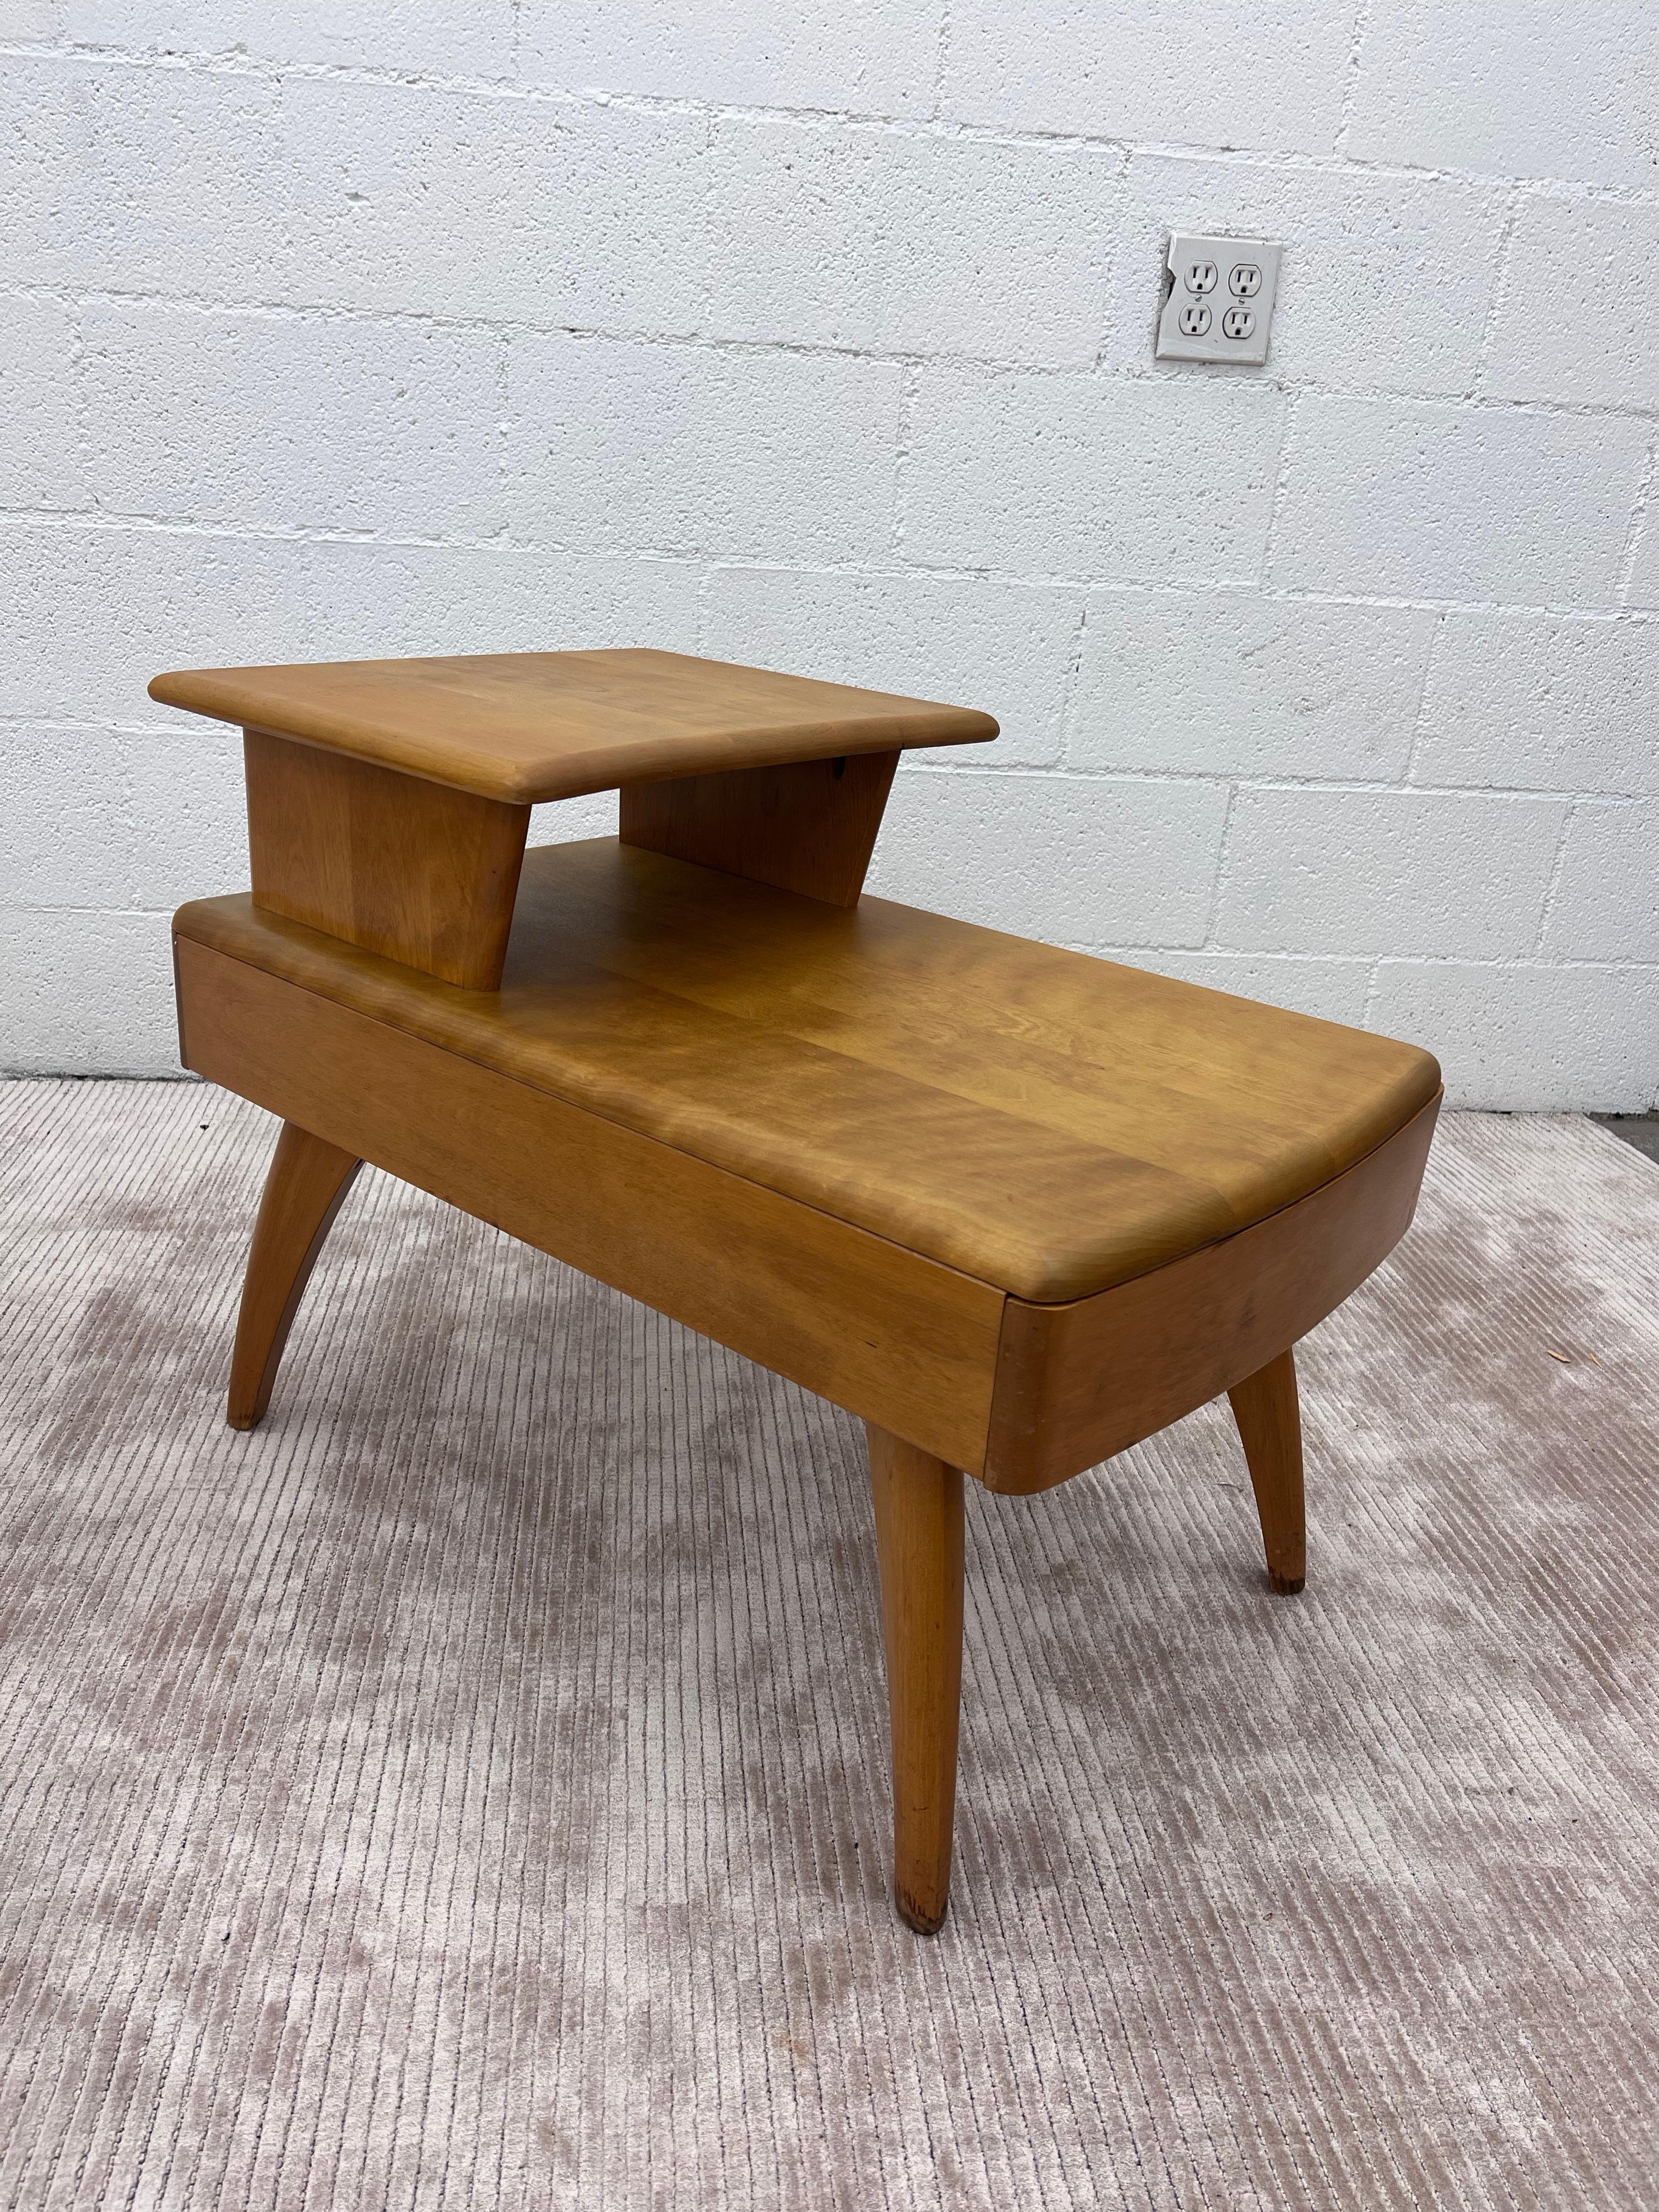 Vintage Heywood Wakefield Mid Century modern 2 Tier Side Table with Drawer For Sale 3